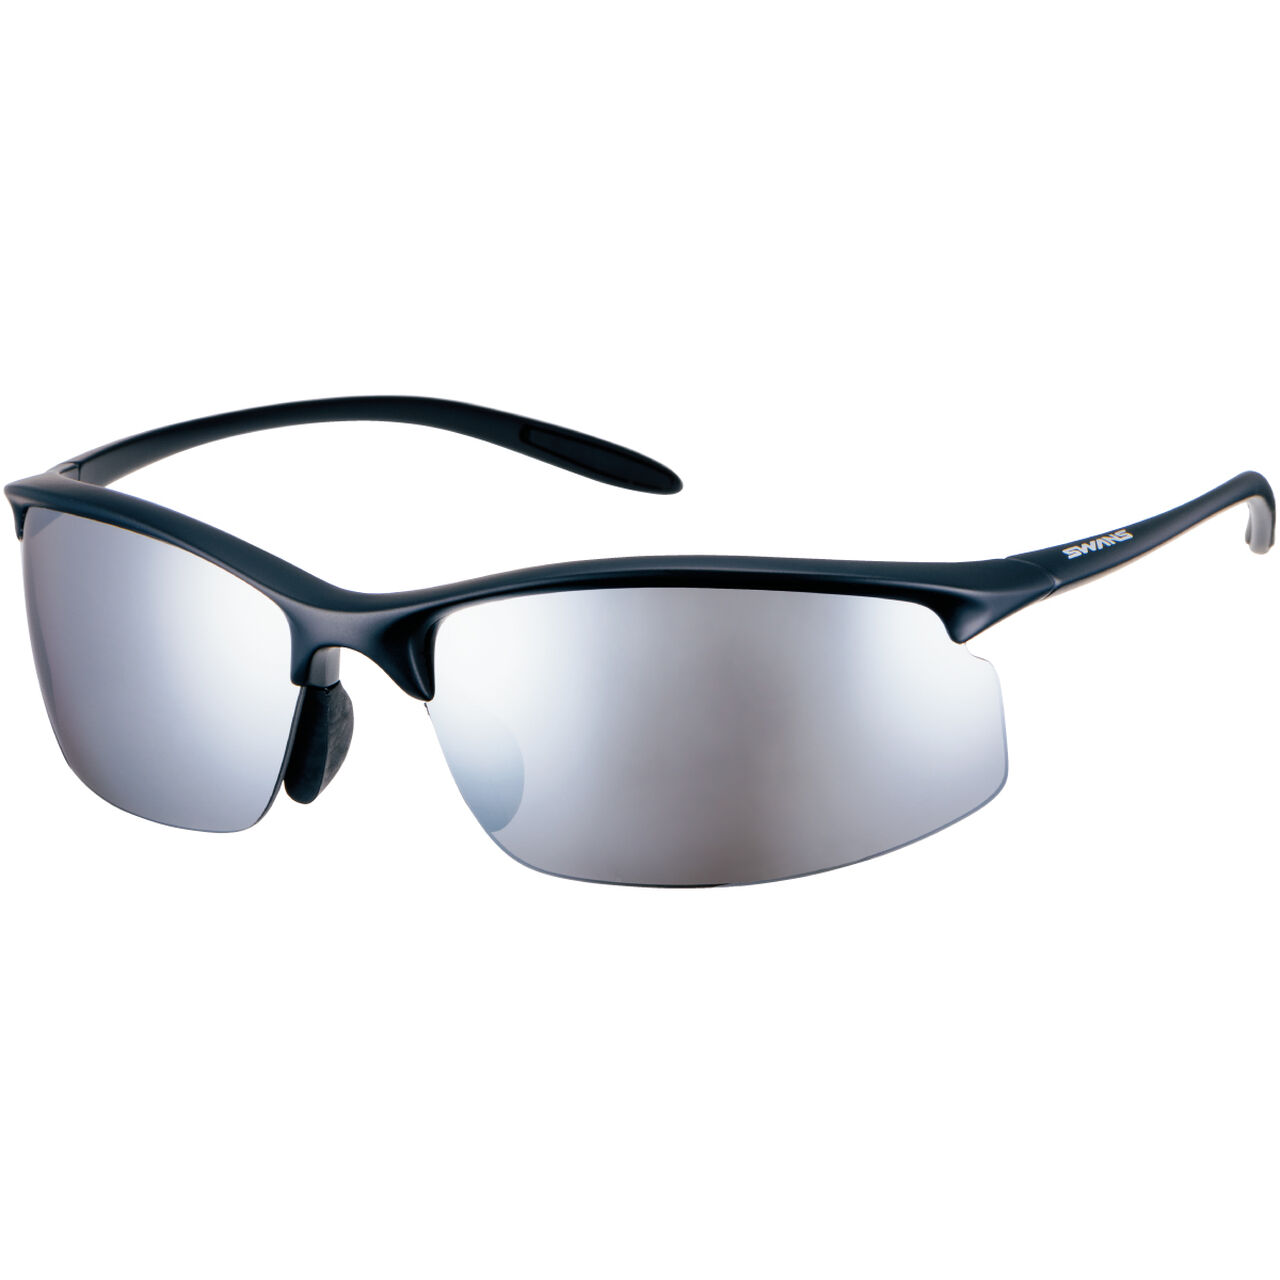 SA-Move 0751 MBK Silver mirror x Polarized Smoke,Opt4, large image number 0